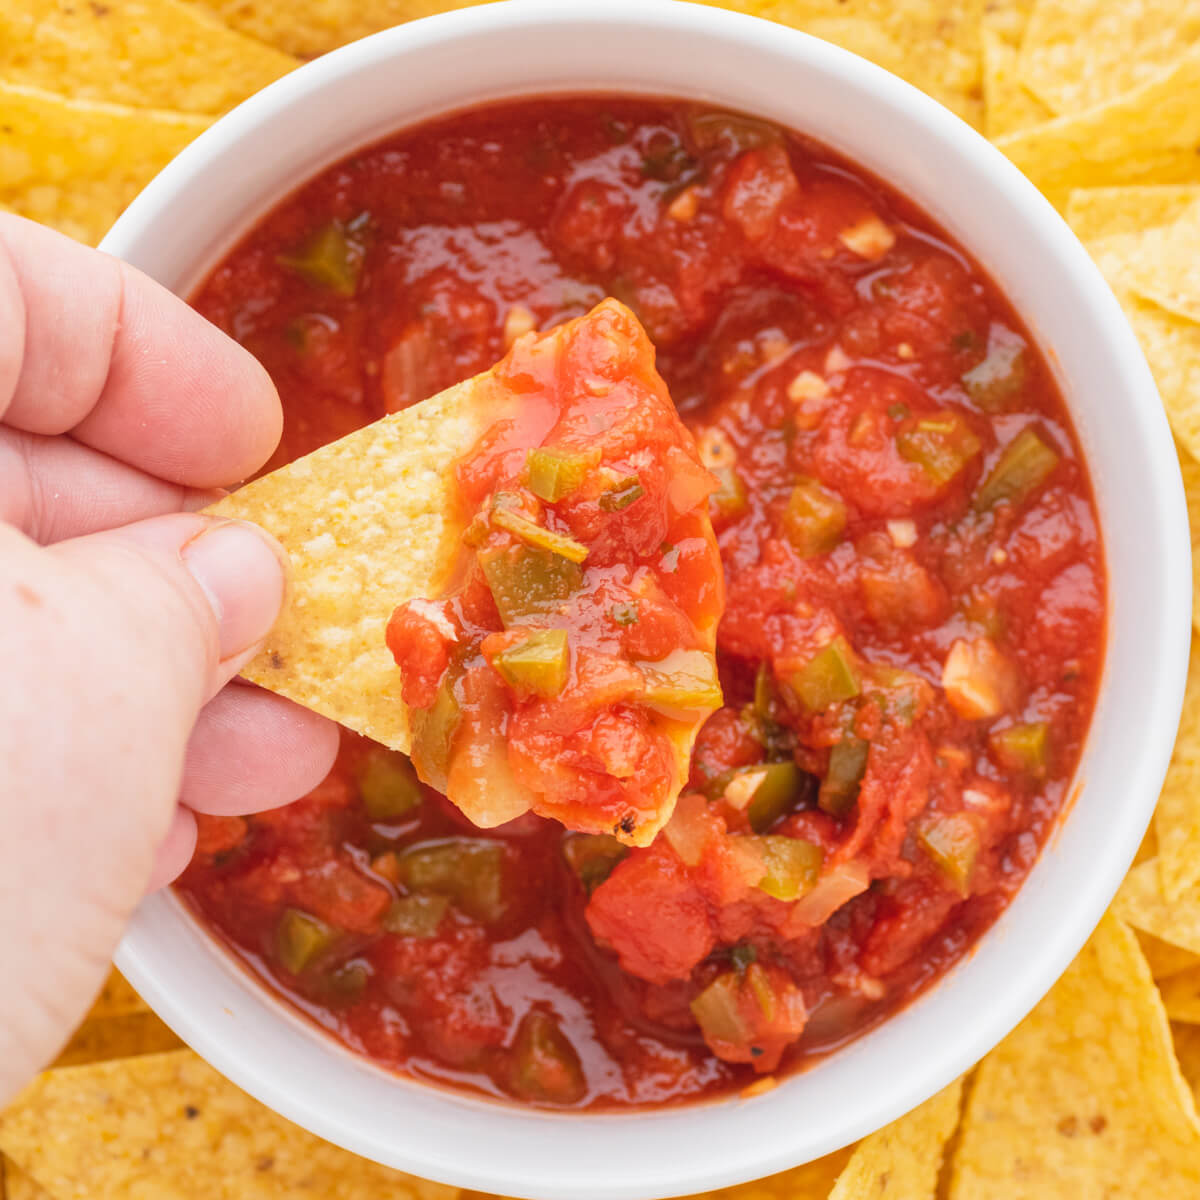 A hand dips a tortilla chip into a bowl of chunky salsa.